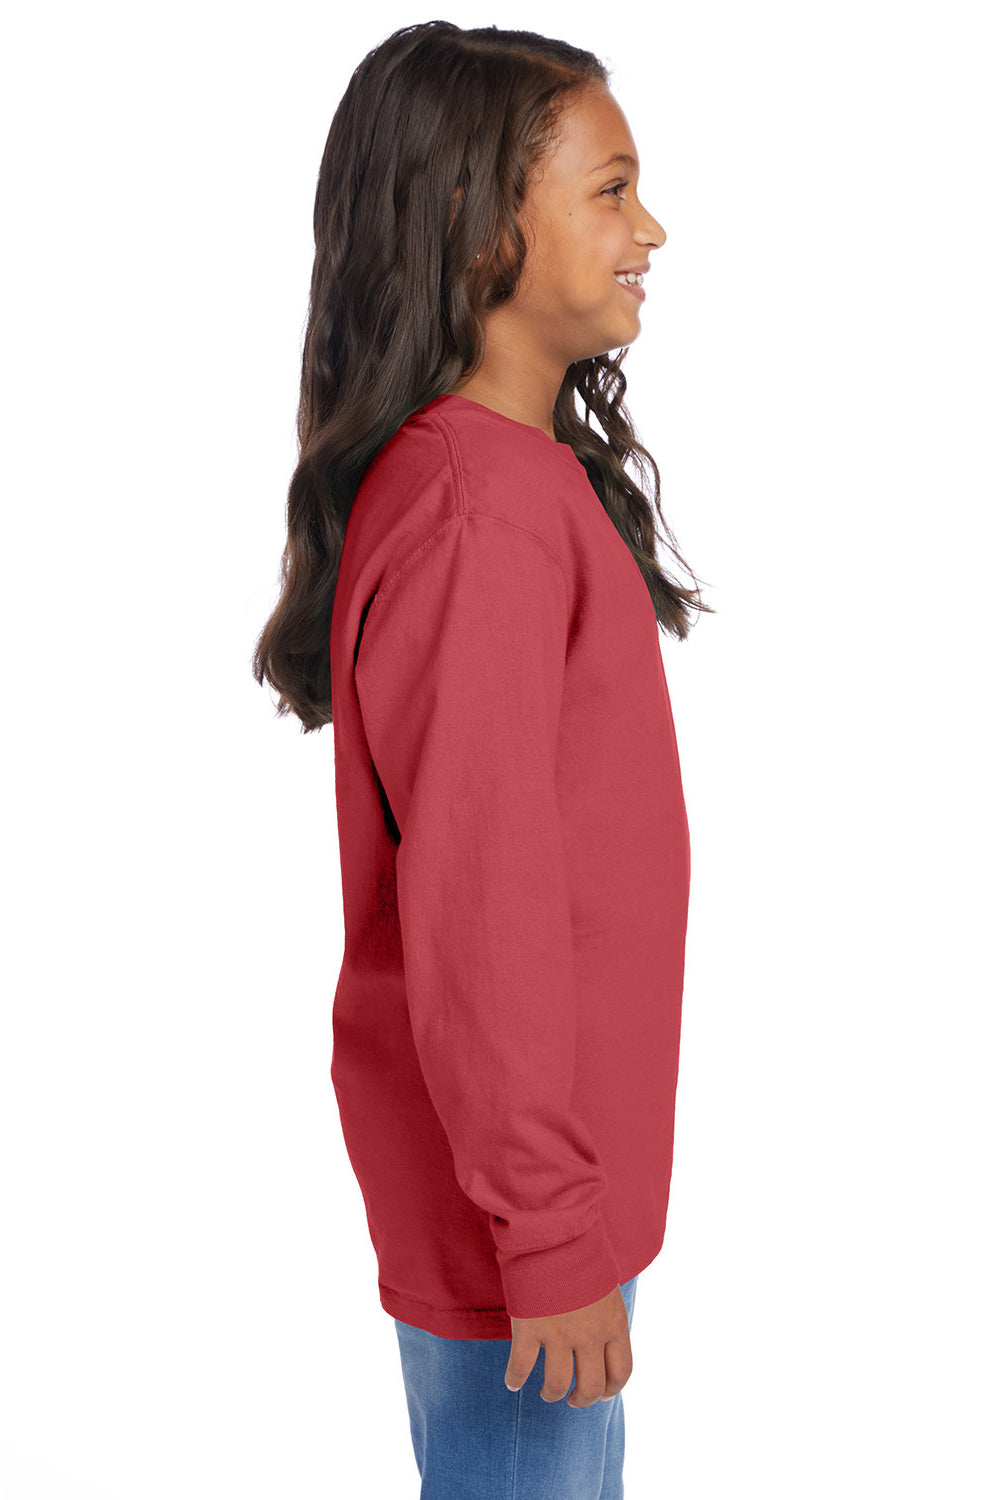 ComfortWash By Hanes GDH275 Youth Garment Dyed Long Sleeve Crewneck T-Shirt Crimson Fall Red Model Side